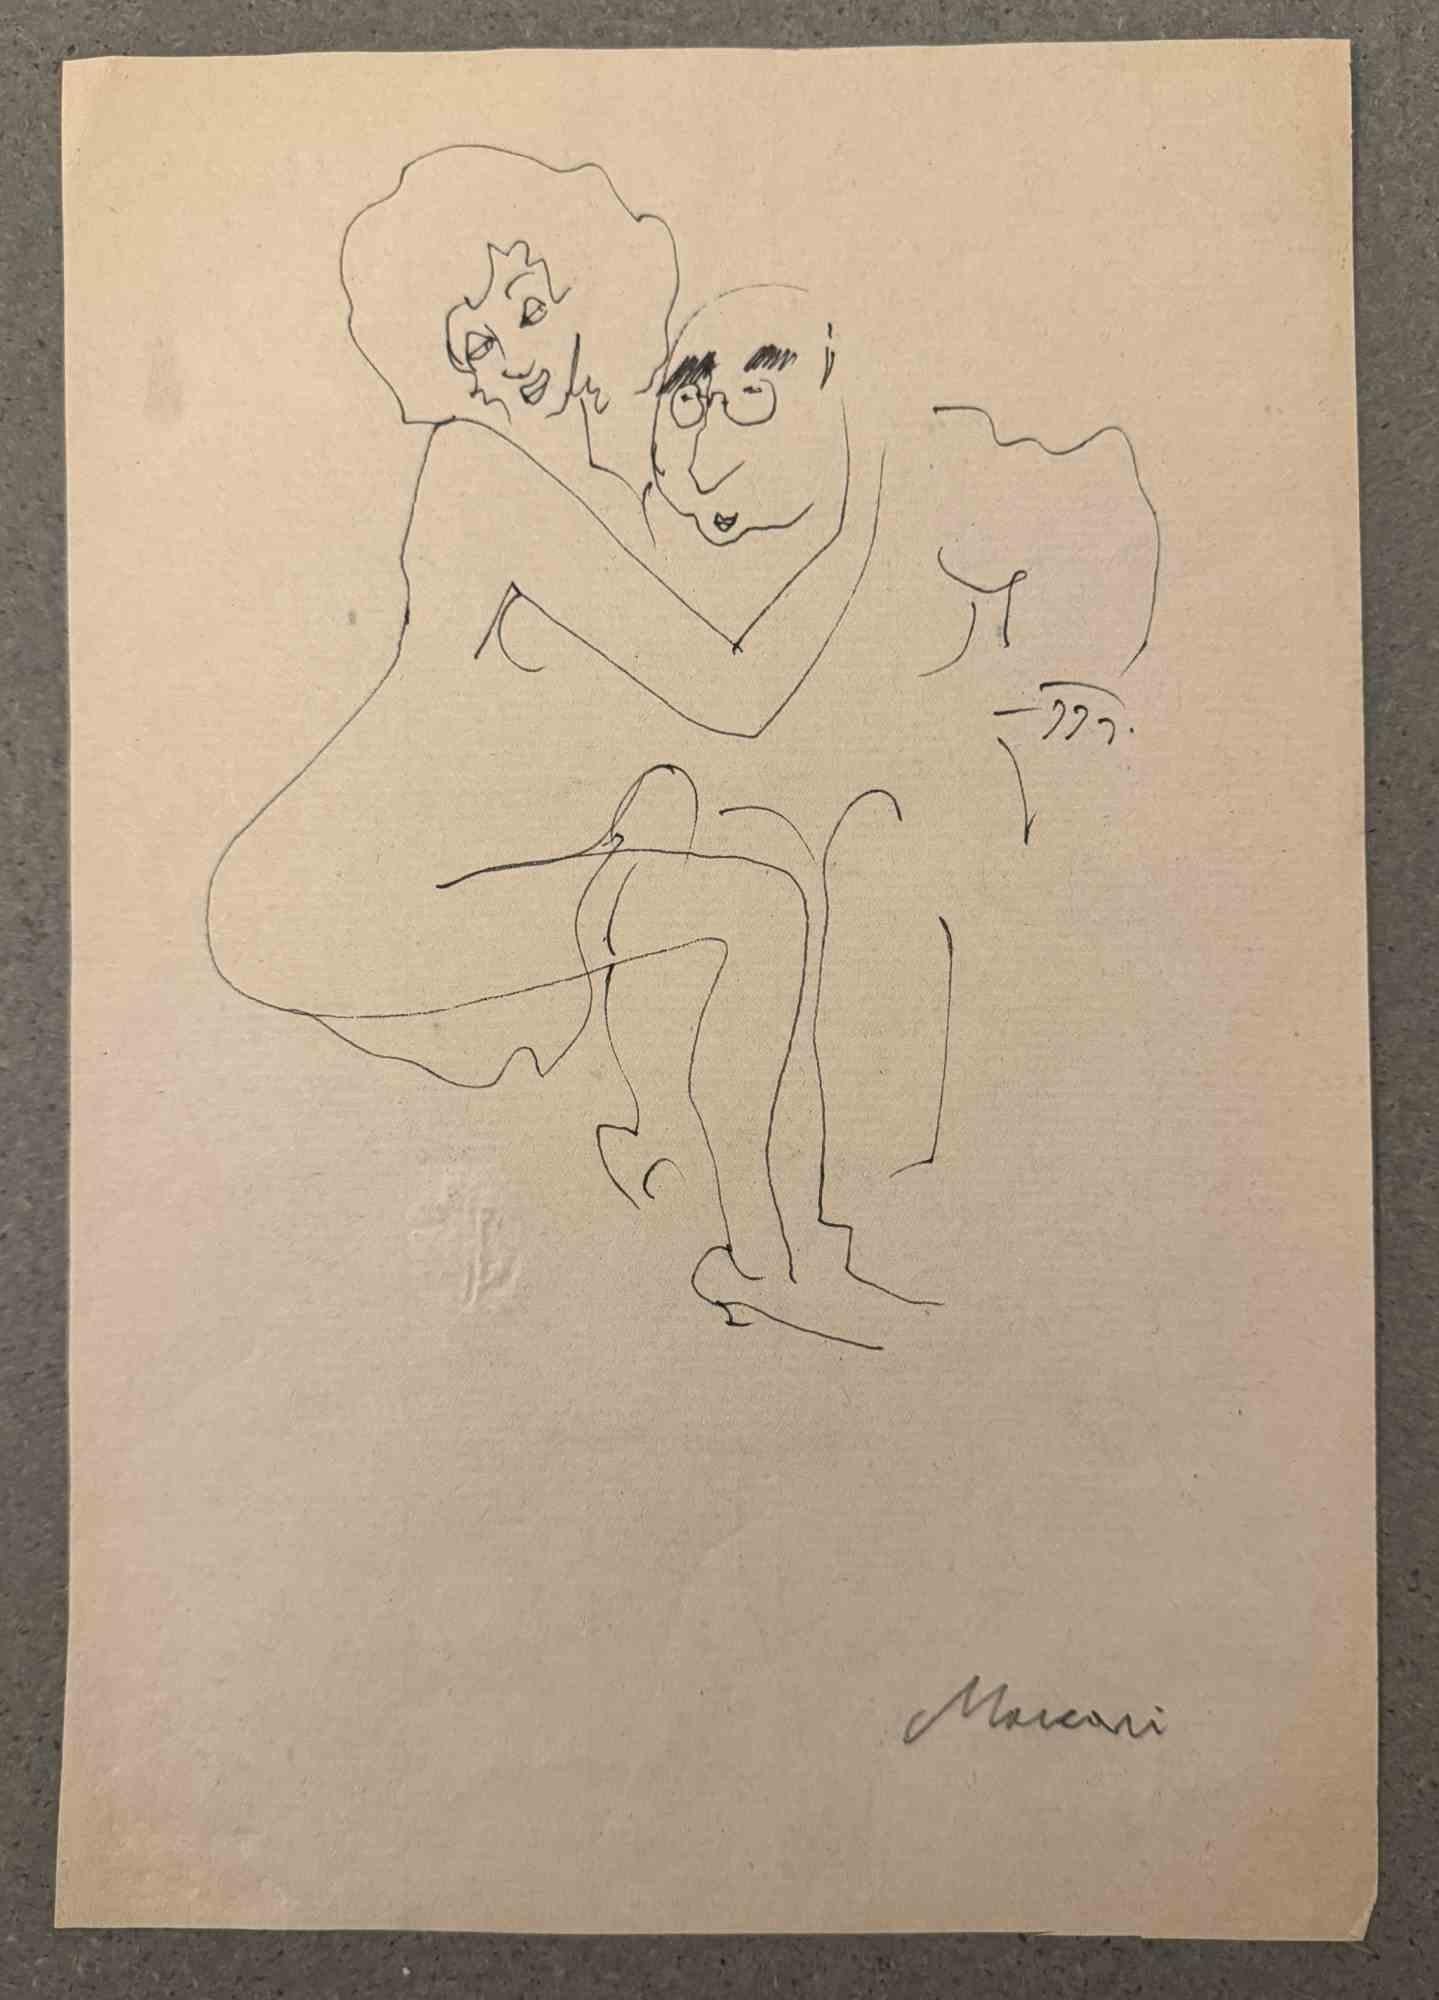 Hugging is a china ink drawing realized by Mino Maccari  (1924-1989) in the Mid-20th Century.

Hand-signed.

Good conditions with slight foxing.

Mino Maccari (Siena, 1924-Rome, June 16, 1989) was an Italian writer, painter, engraver and journalist,